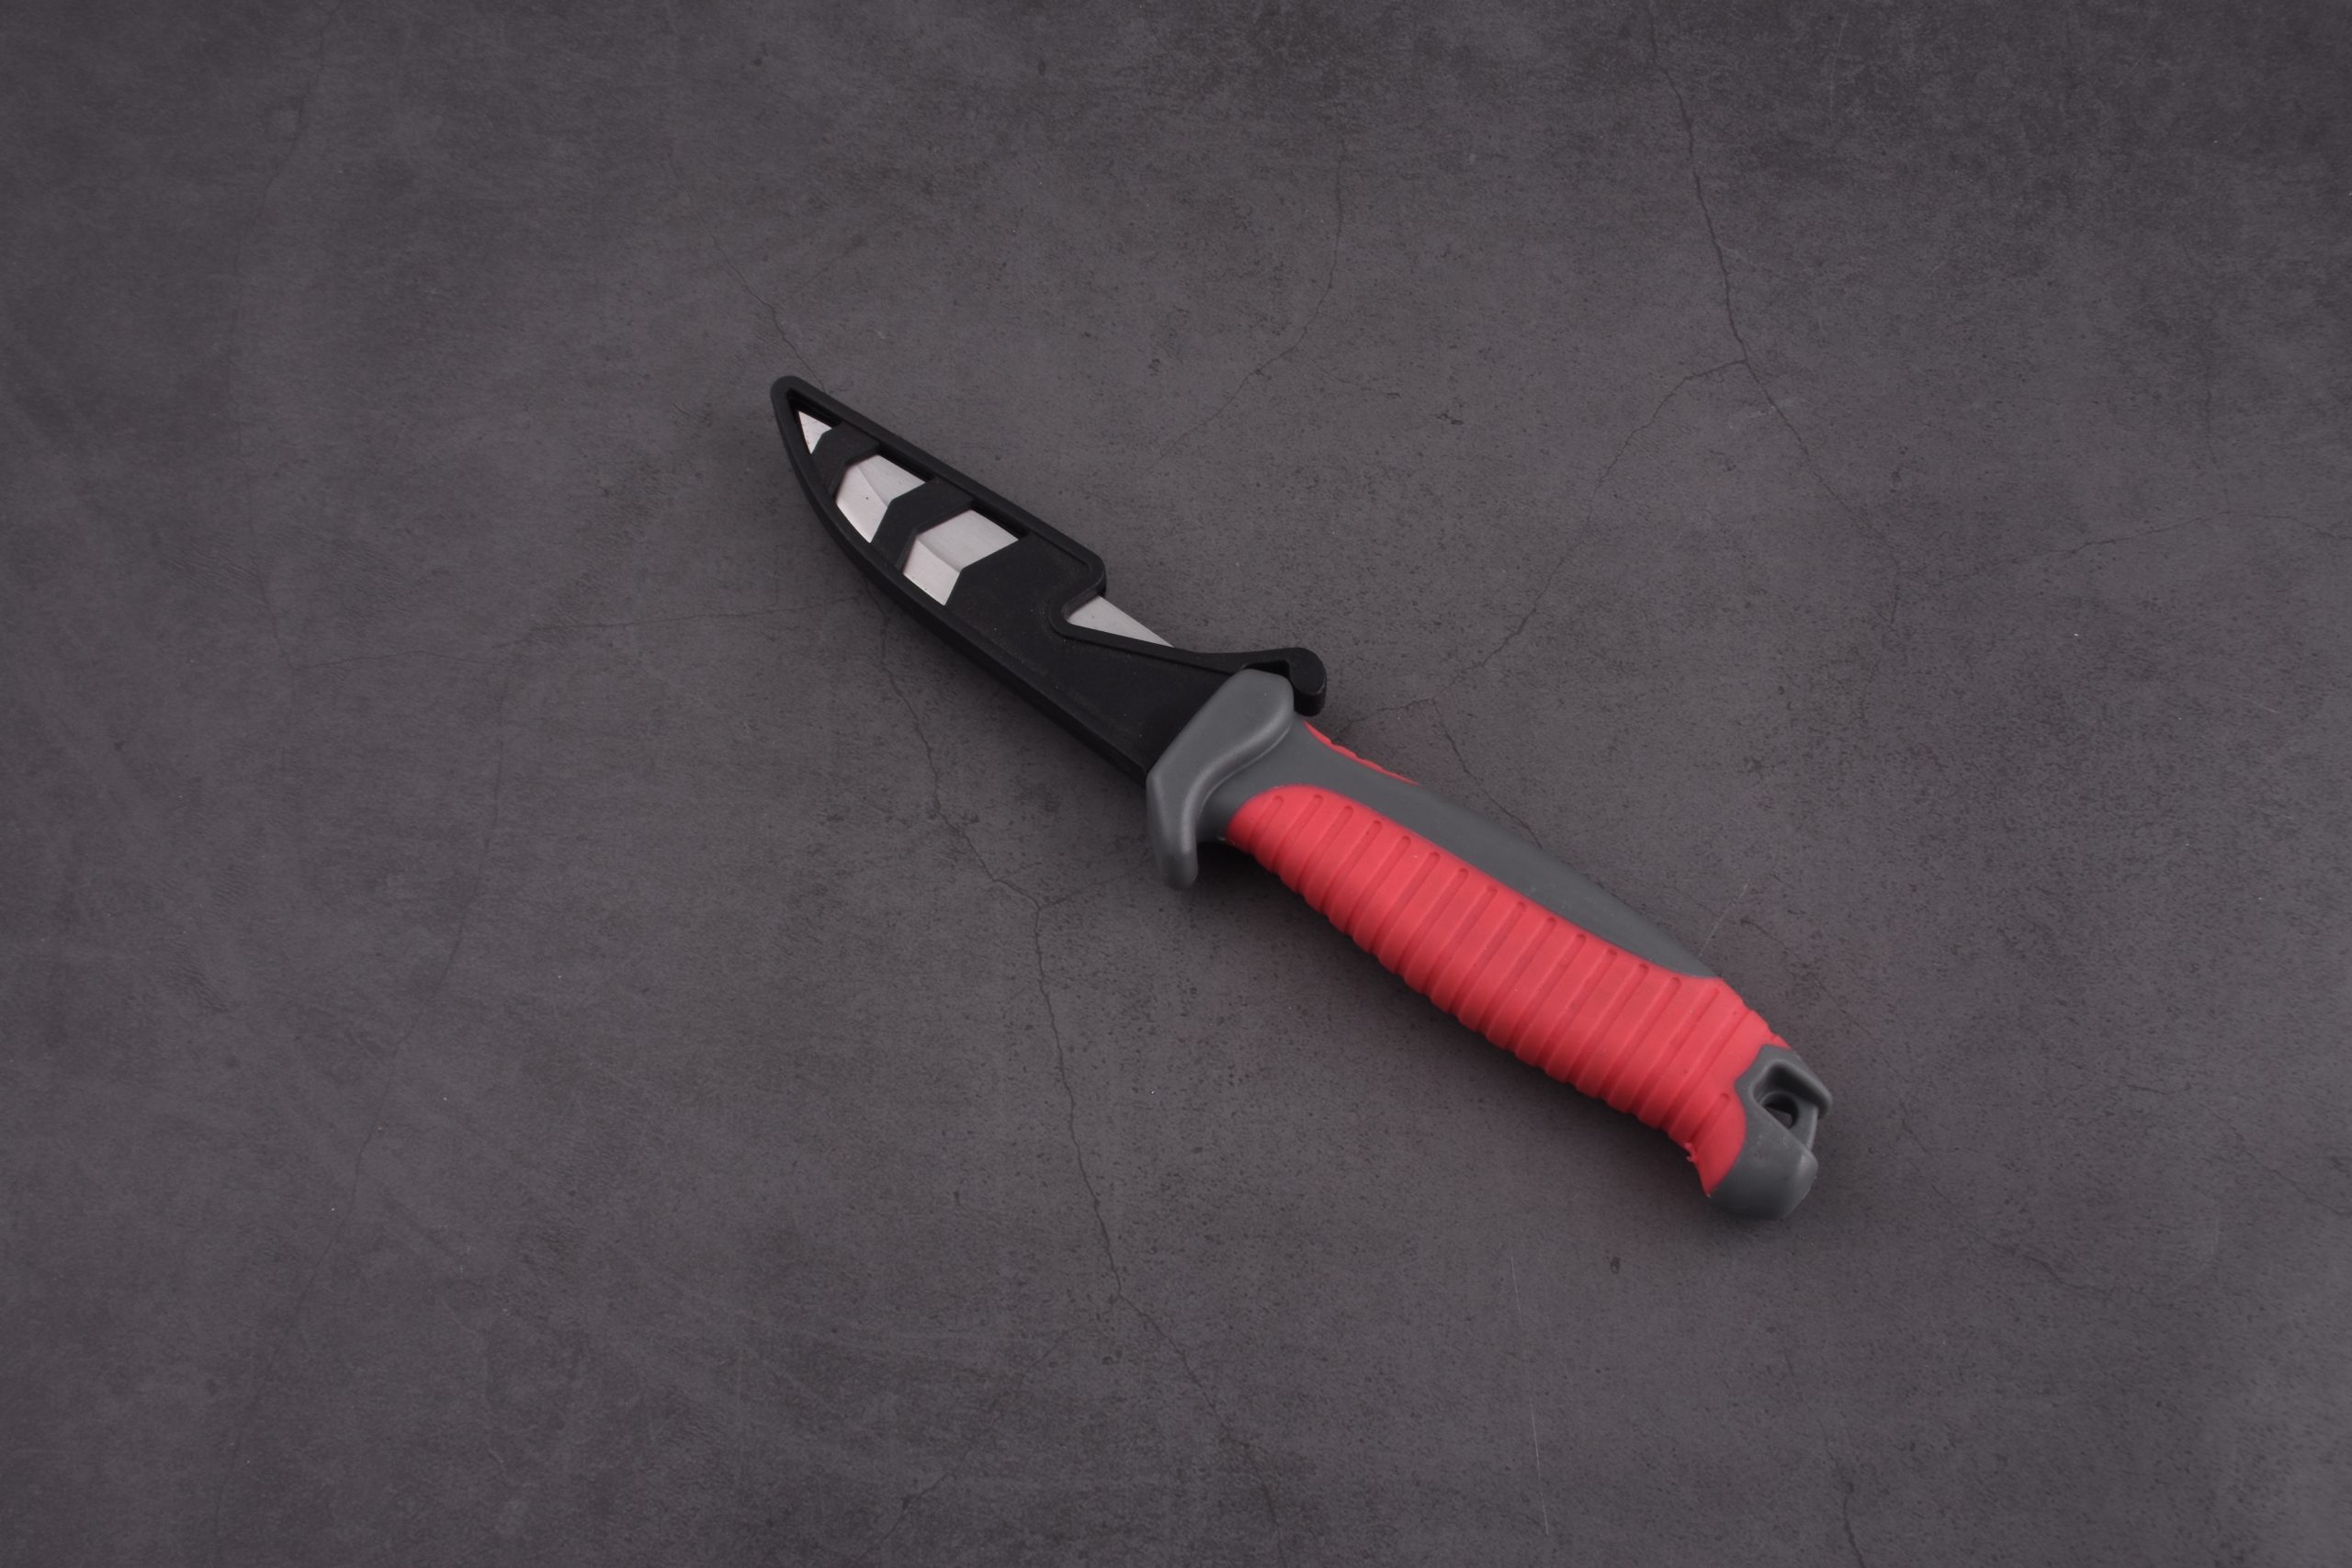 OEM Fixed Fishing Knife 3Cr13 Blade PP+TPR Handle with PP sheath black & red FX-22654-04 02